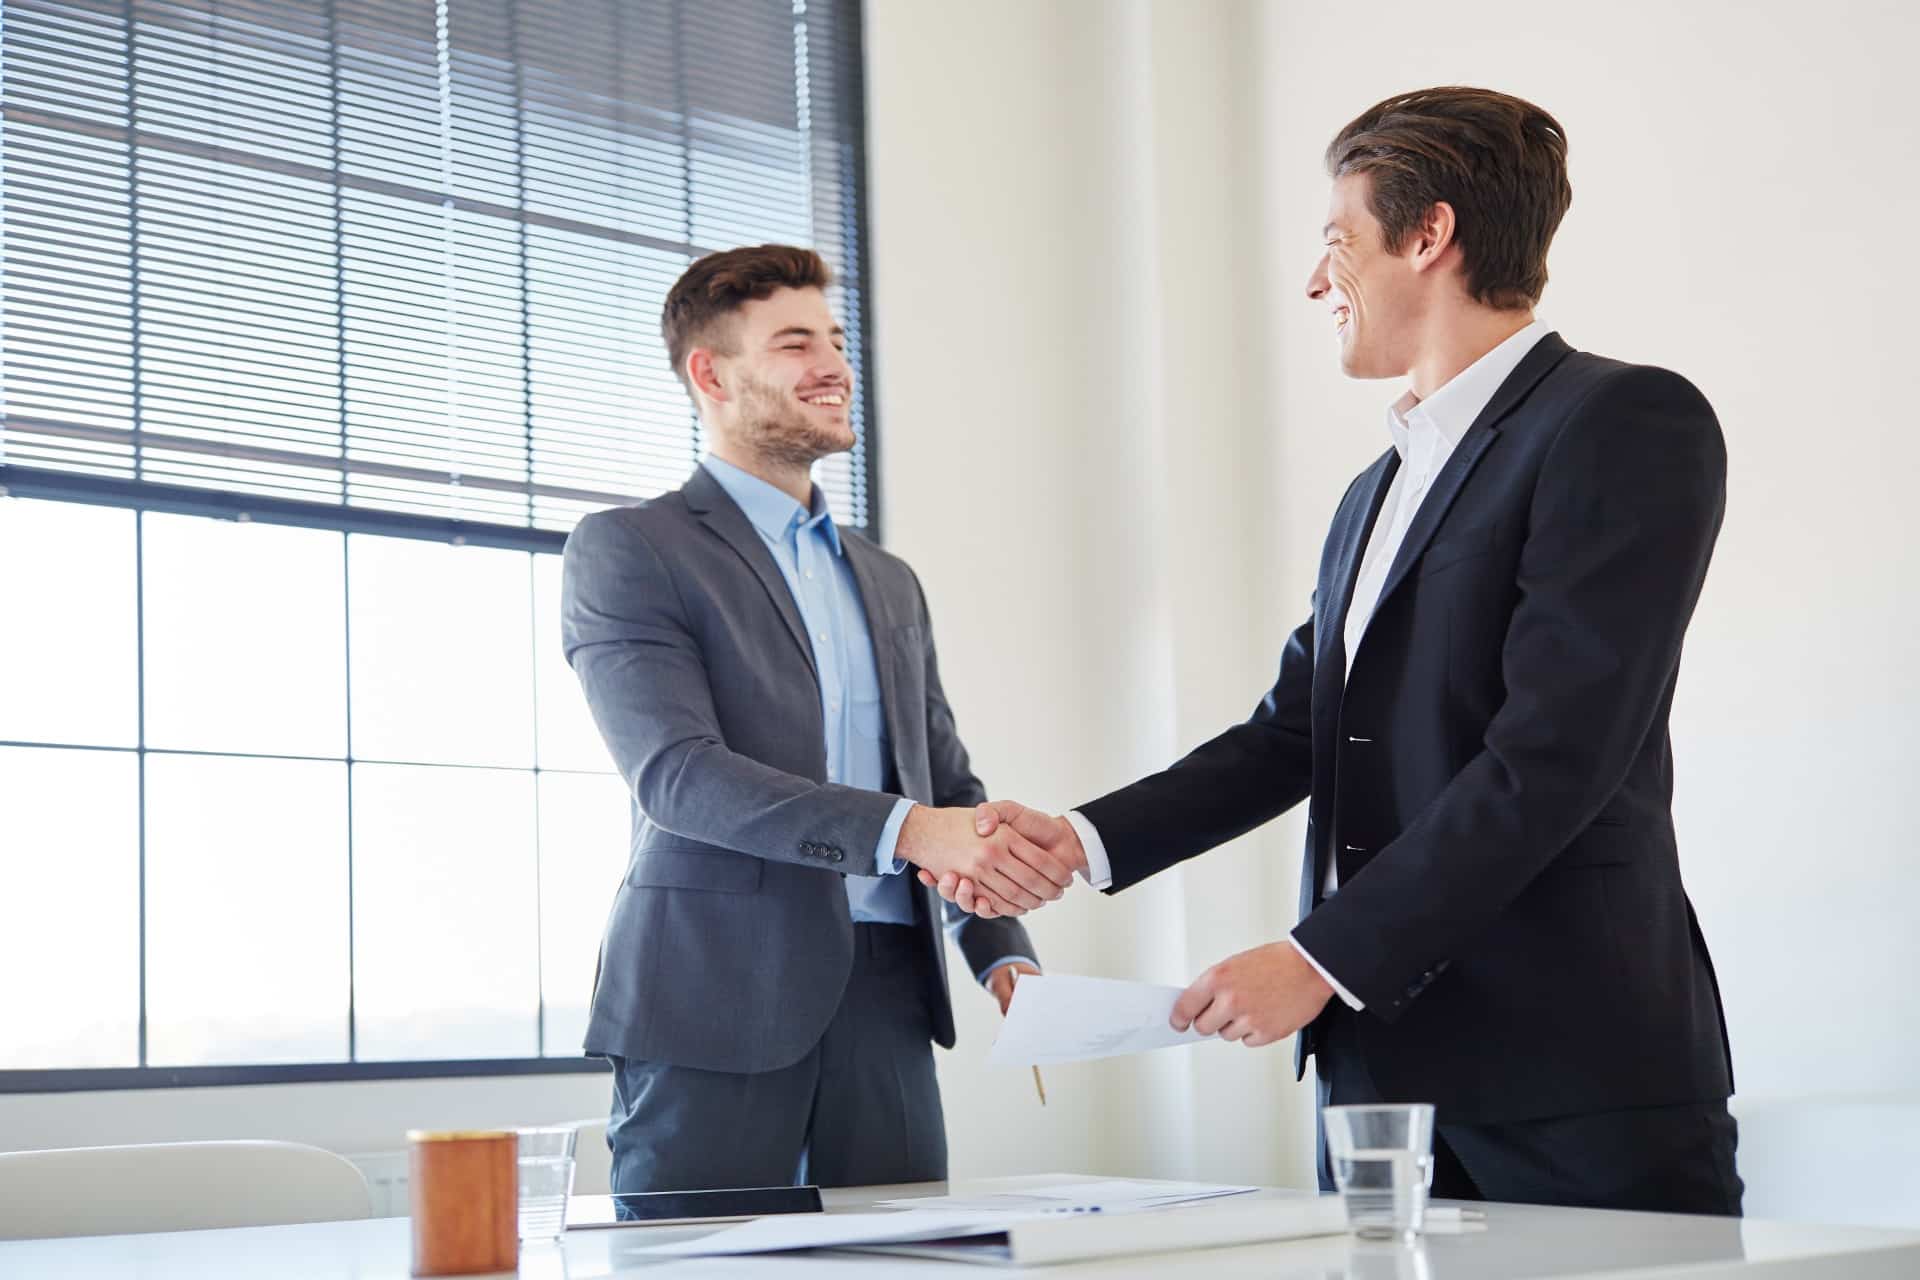 Two Men shaking hands after a Business Meeting